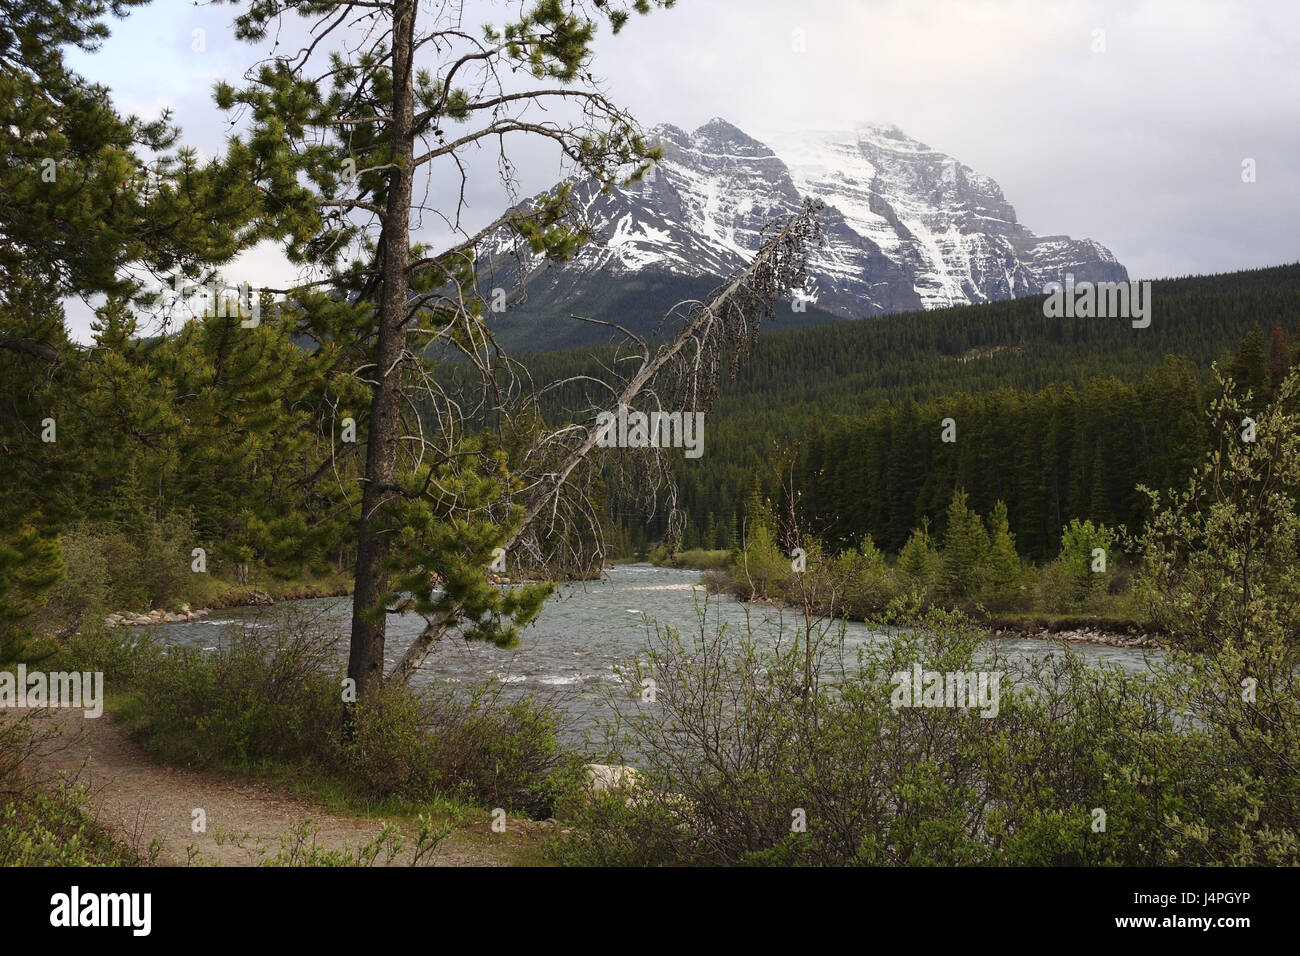 Mountain flux, sinuously, shore, wooded, mountain scenery, summit, snowy, cloudies, Canada, Alberta, Banff Nationwide park, brine Louise, Rocky Mountains, Bow River, Mt. Temple, Stock Photo